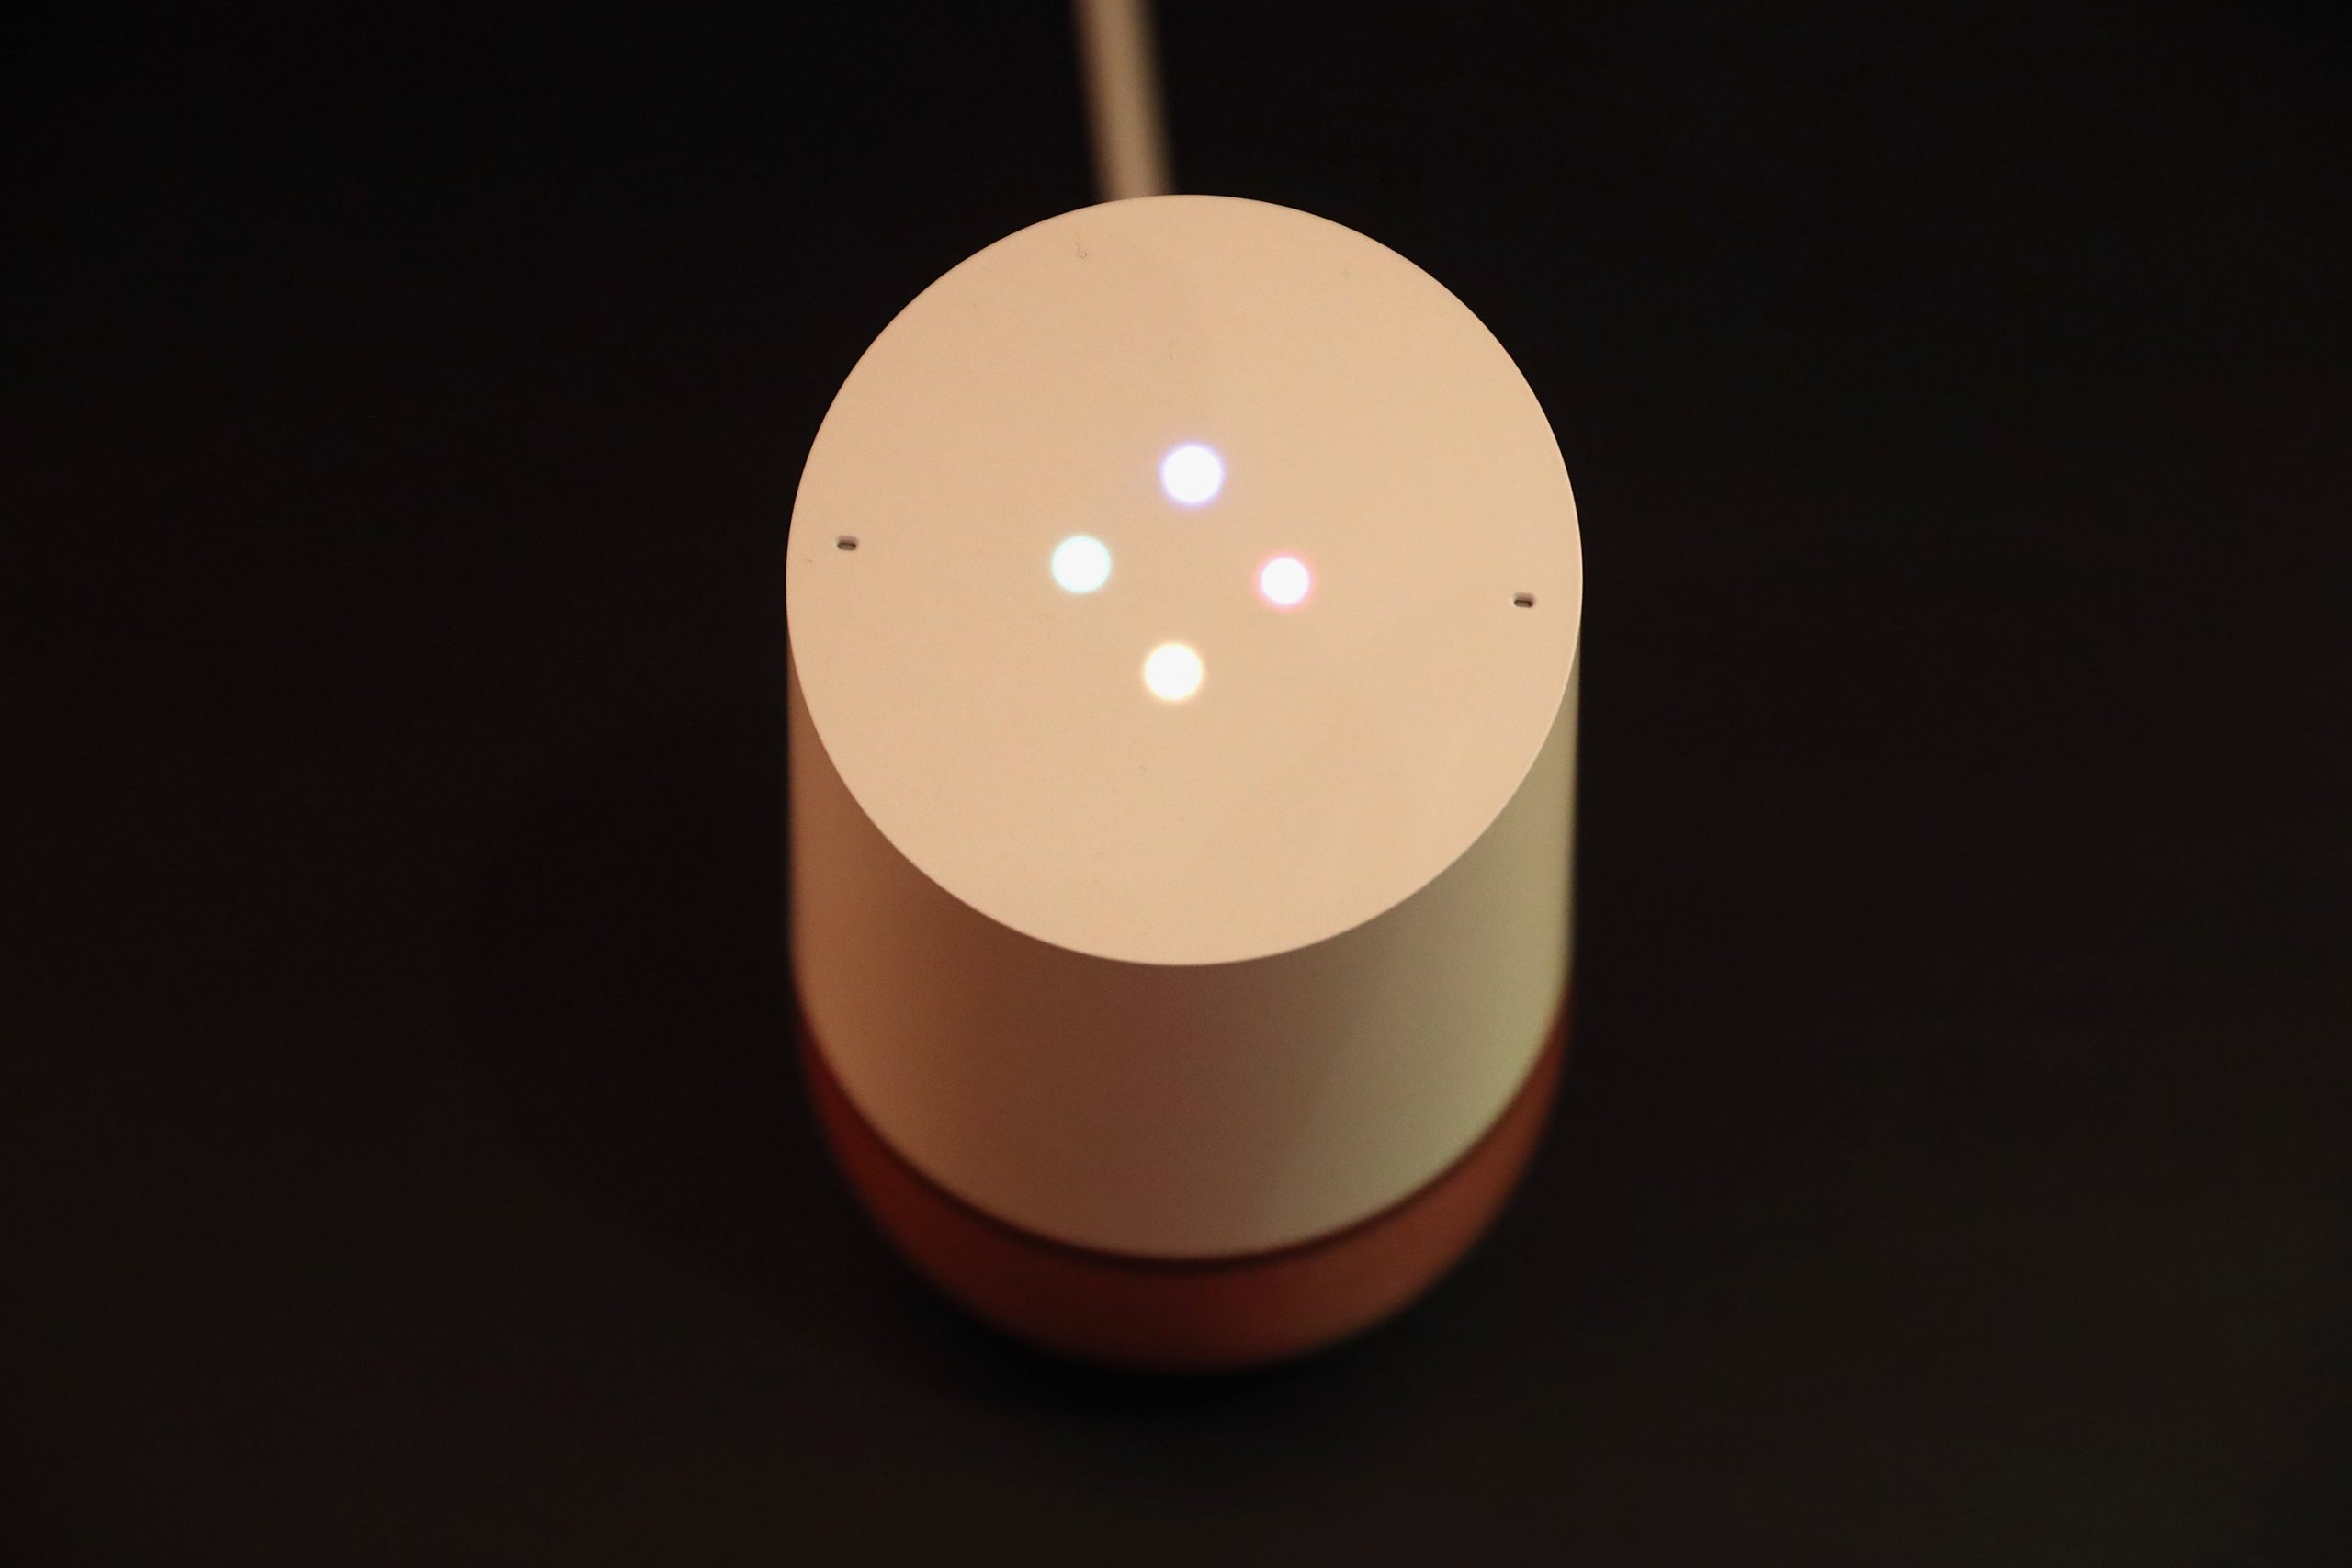 A Google Home virtual assistant that allows you to issue commands to YouTube and a number of other applications